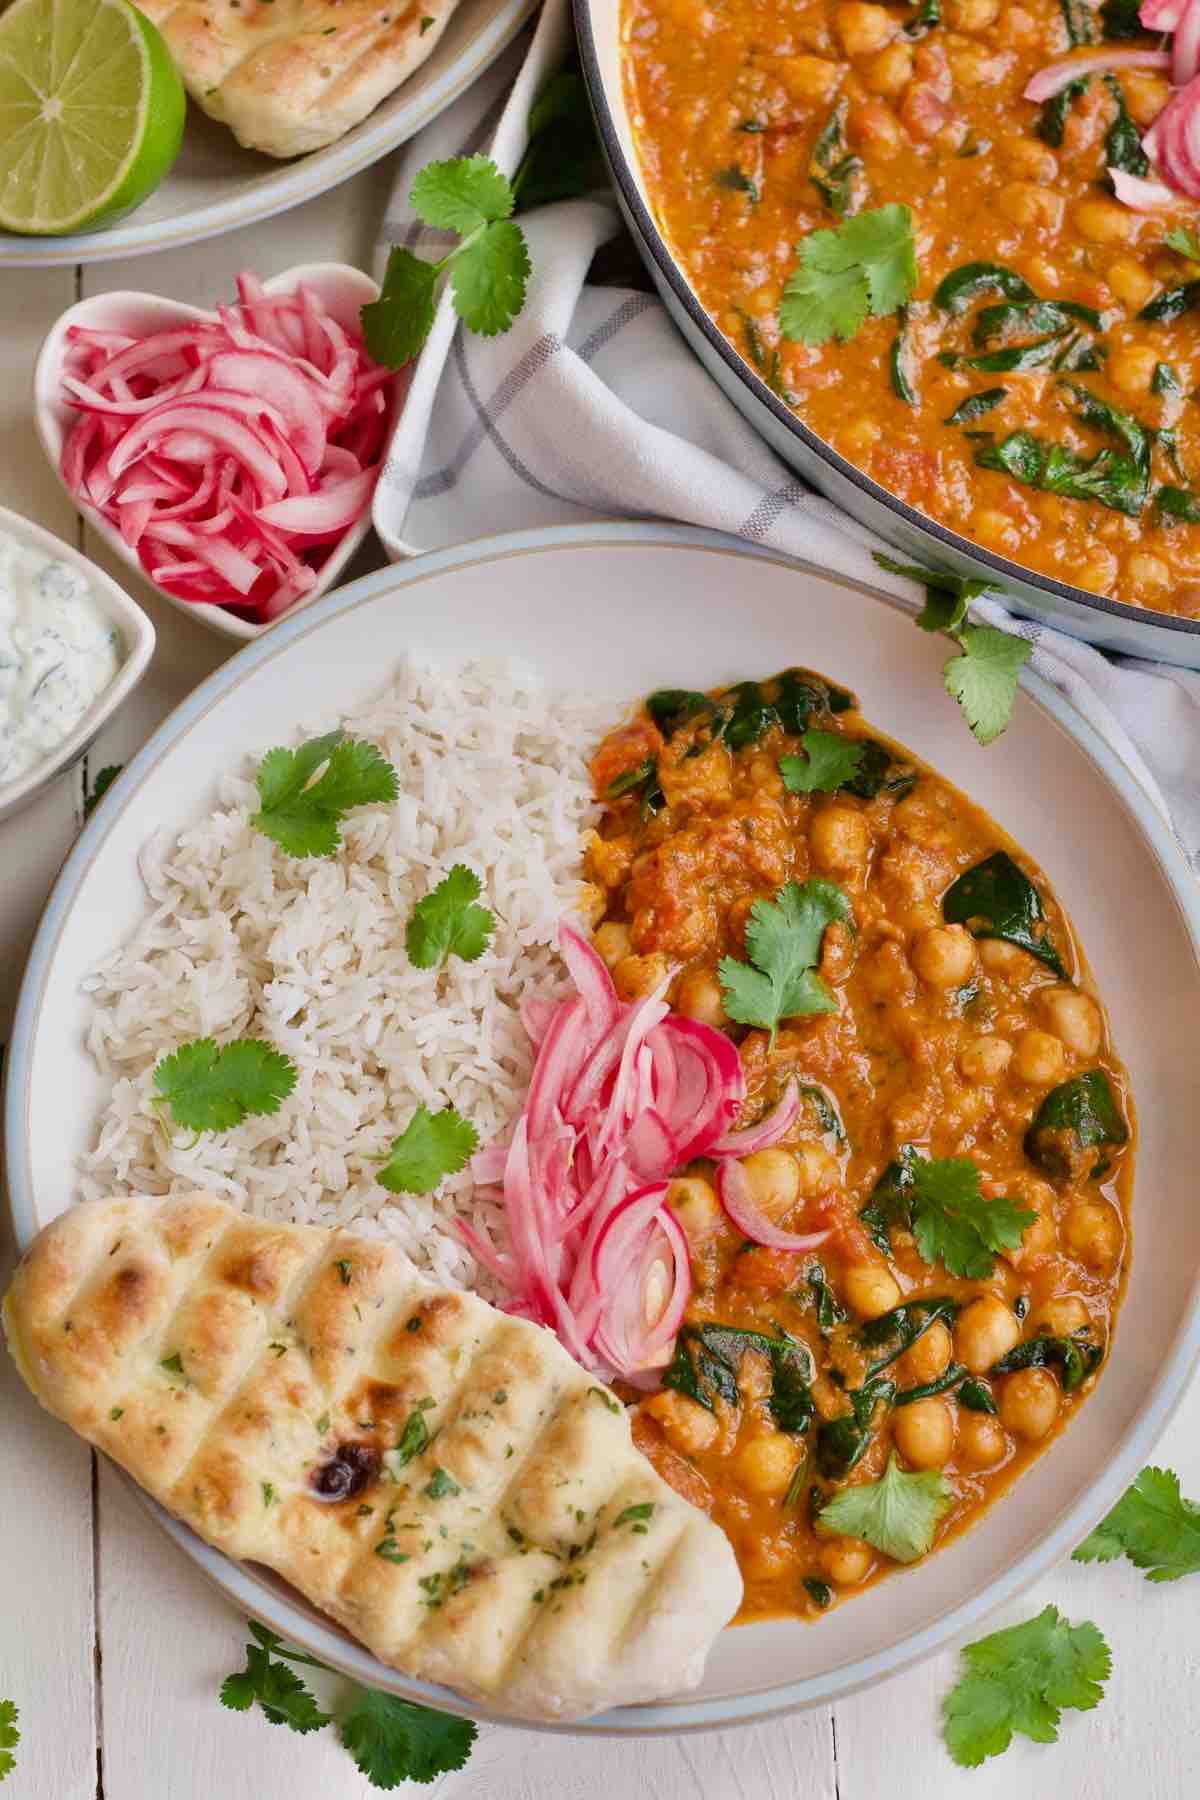 Bowl with curry, rice, naan bread and pickled onions.